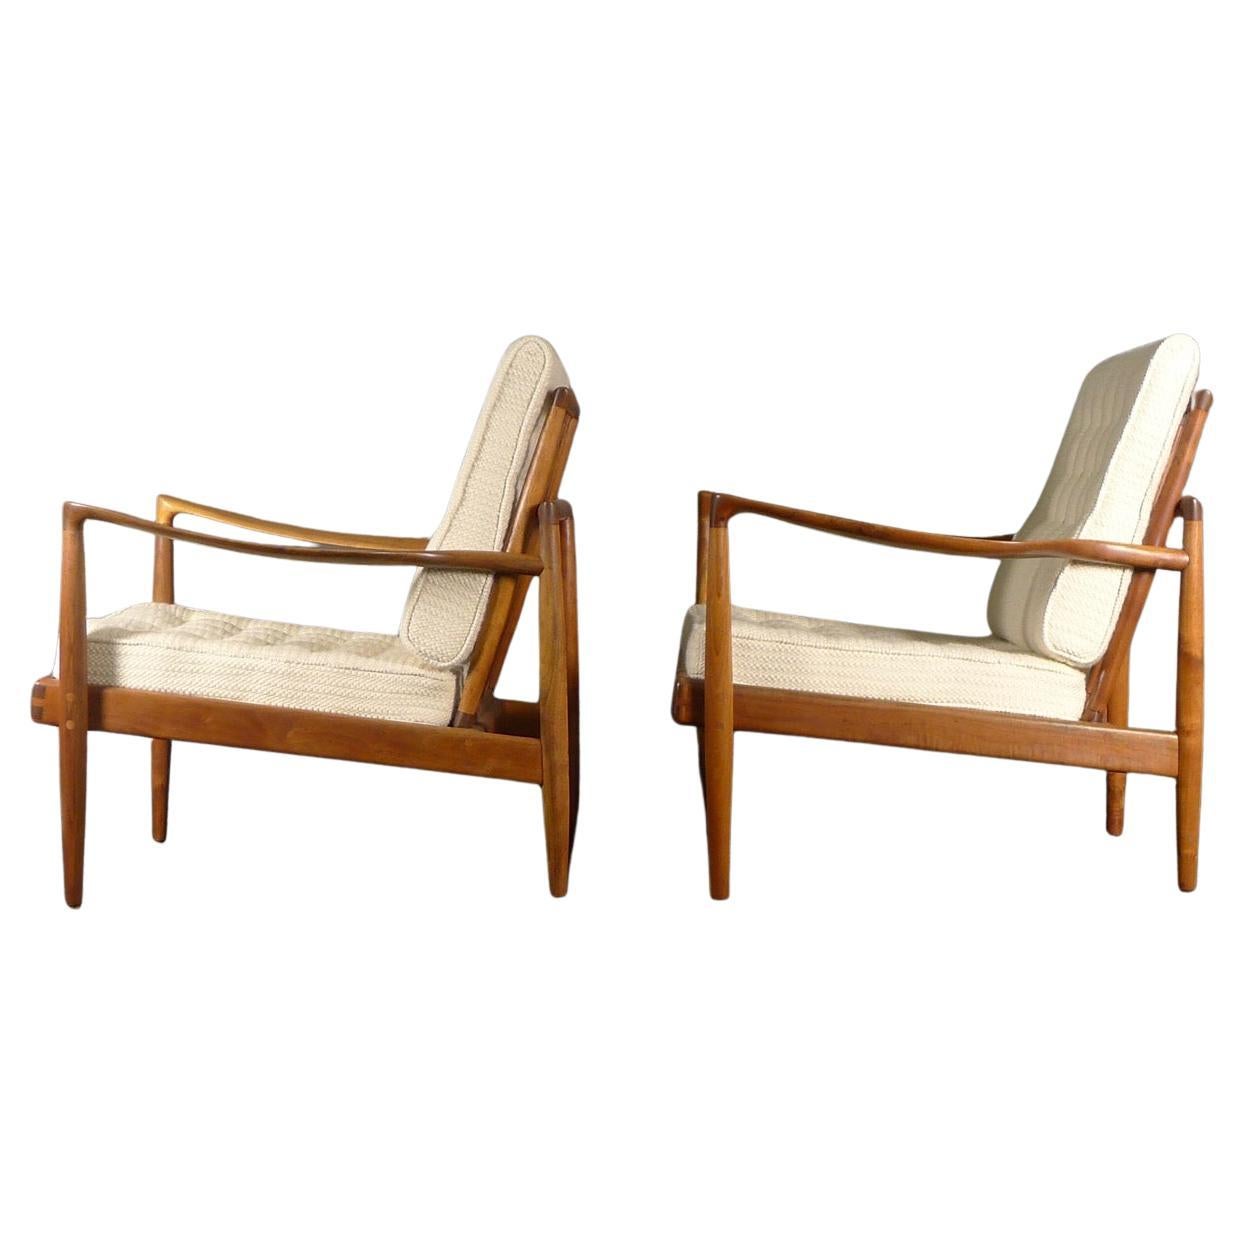 Sam Maloof, Pair of Early Hueter Chairs, circa 1954, in American Walnut